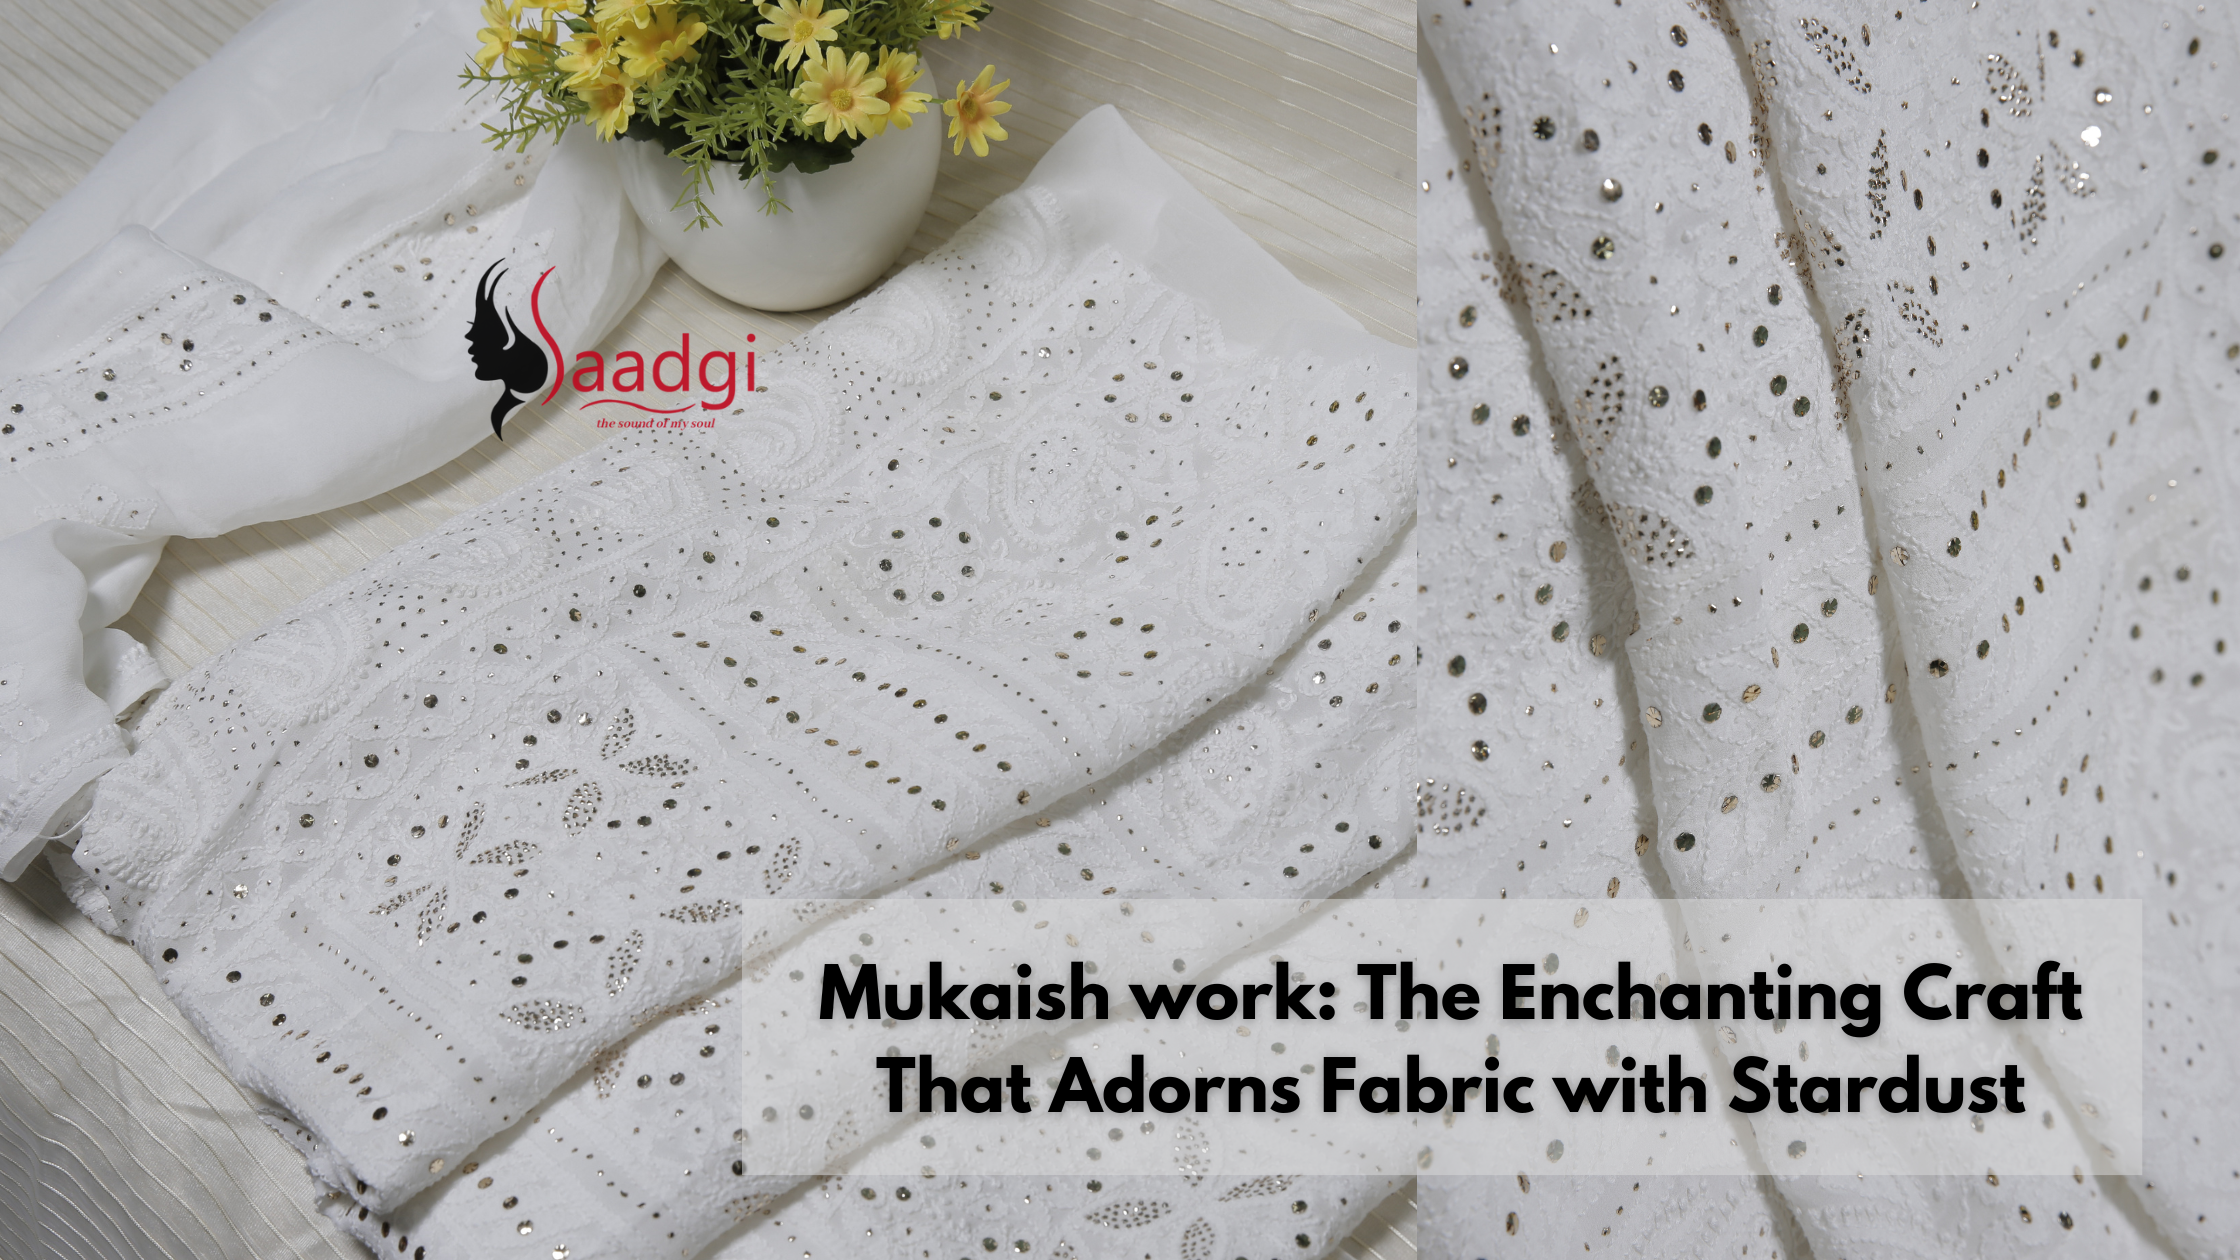 Mukaish work: The Enchanting Craft That Adorns Fabric with Stardust